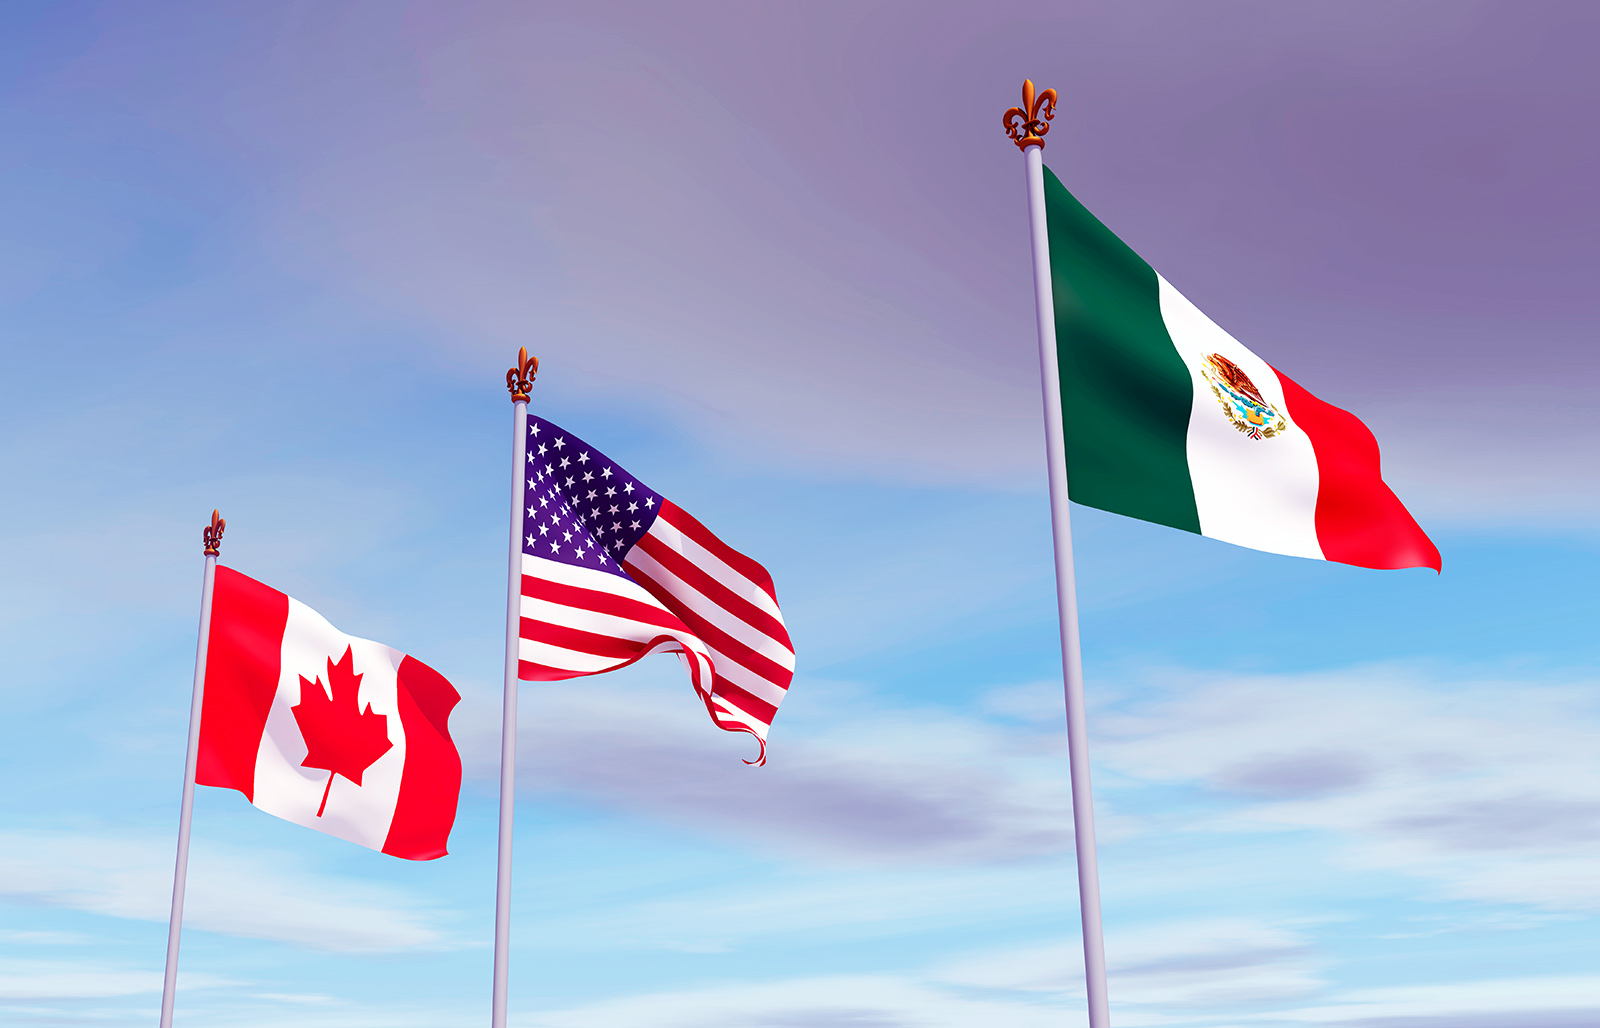 USMCA could be a source of economic recovery for Mexico